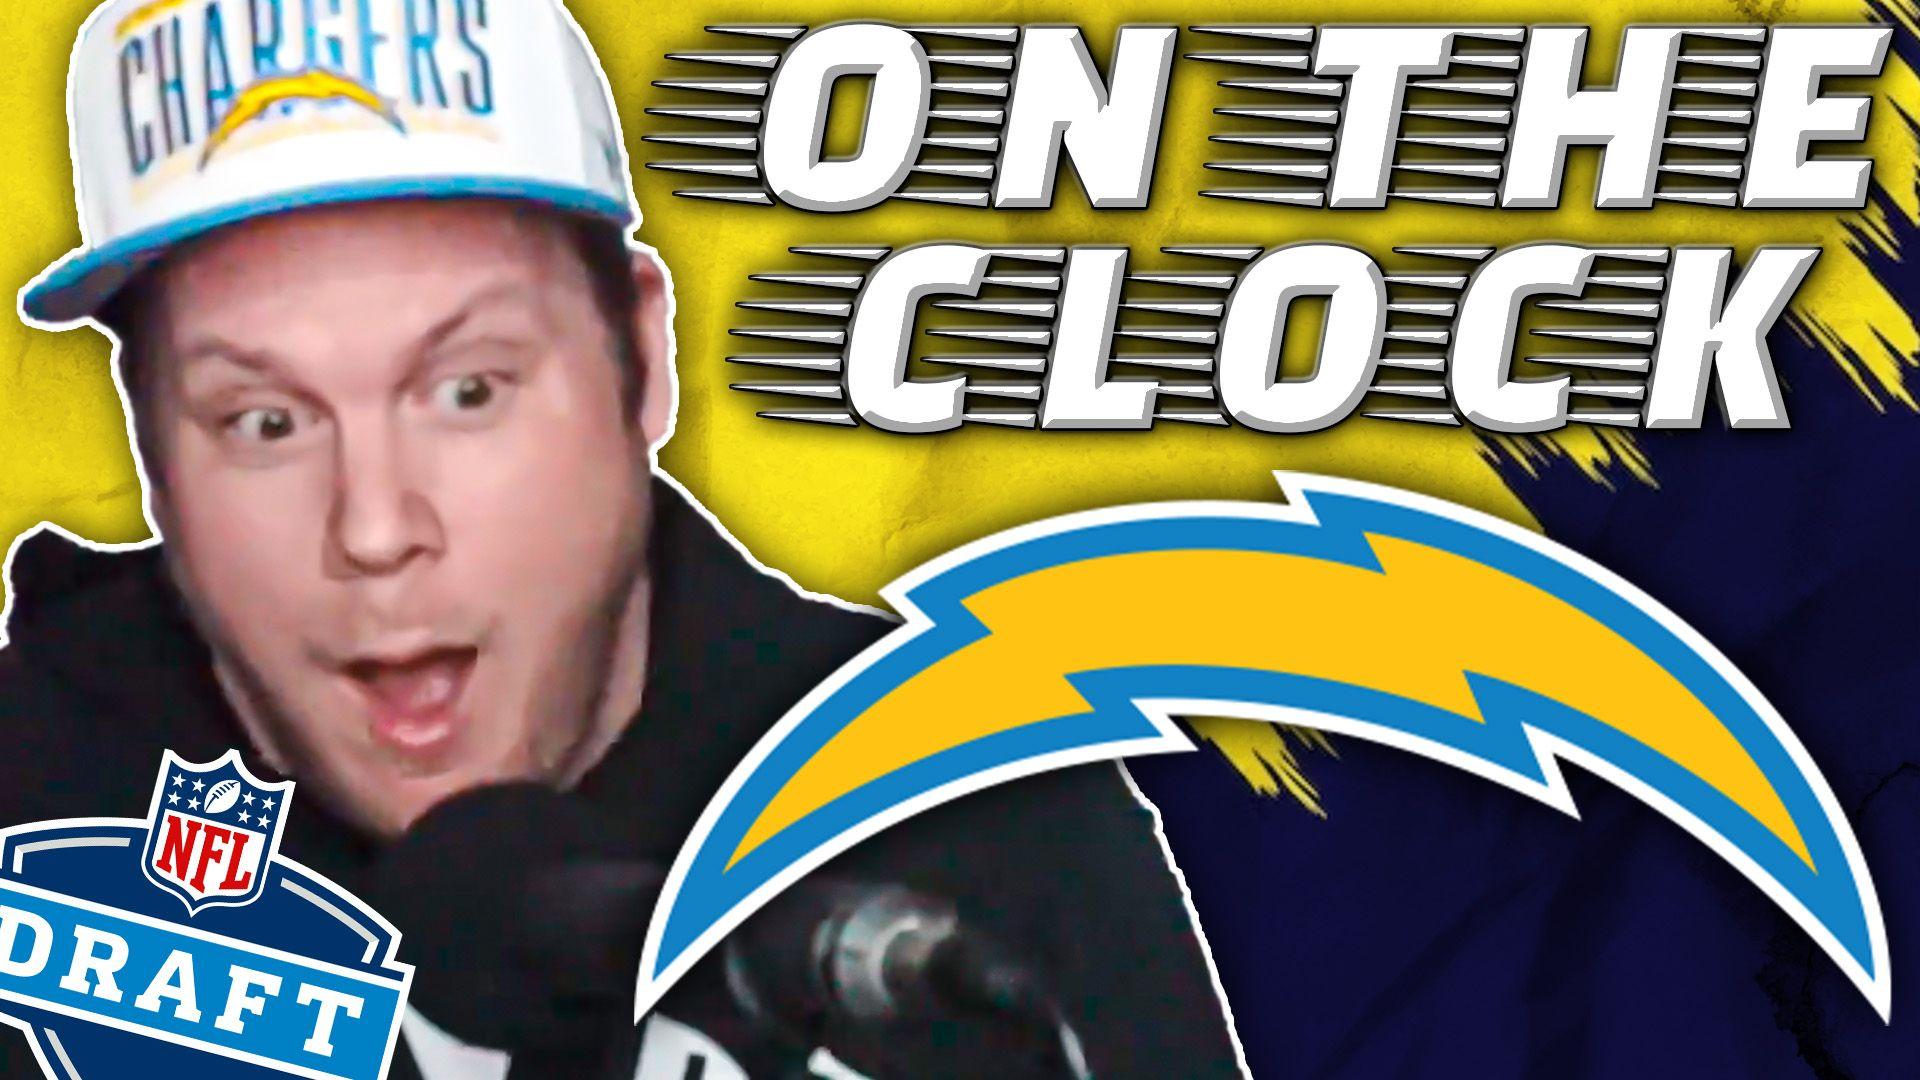 On The clock chargers.jpg